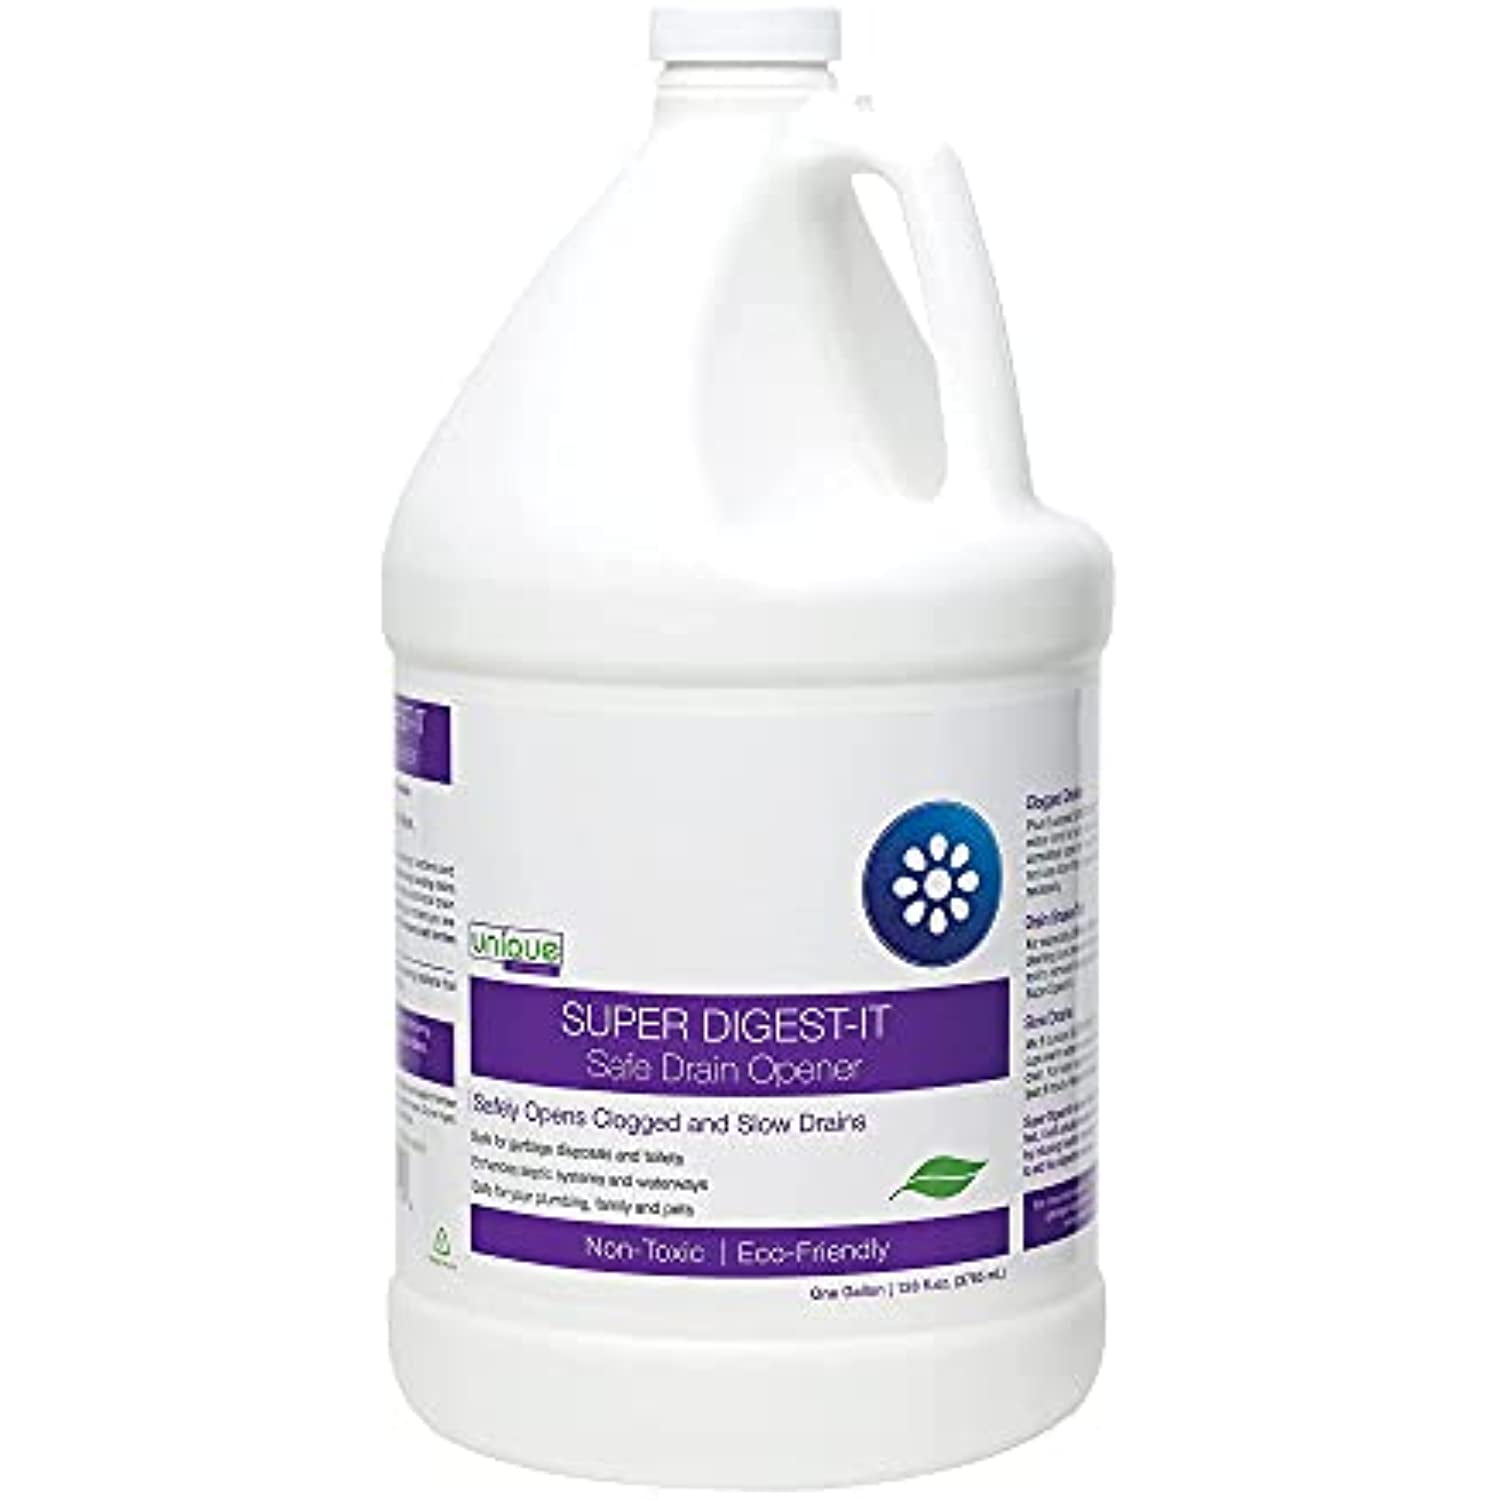 Comstar 0.5 Gallon Blow Out 30-480 Drain Cleaner